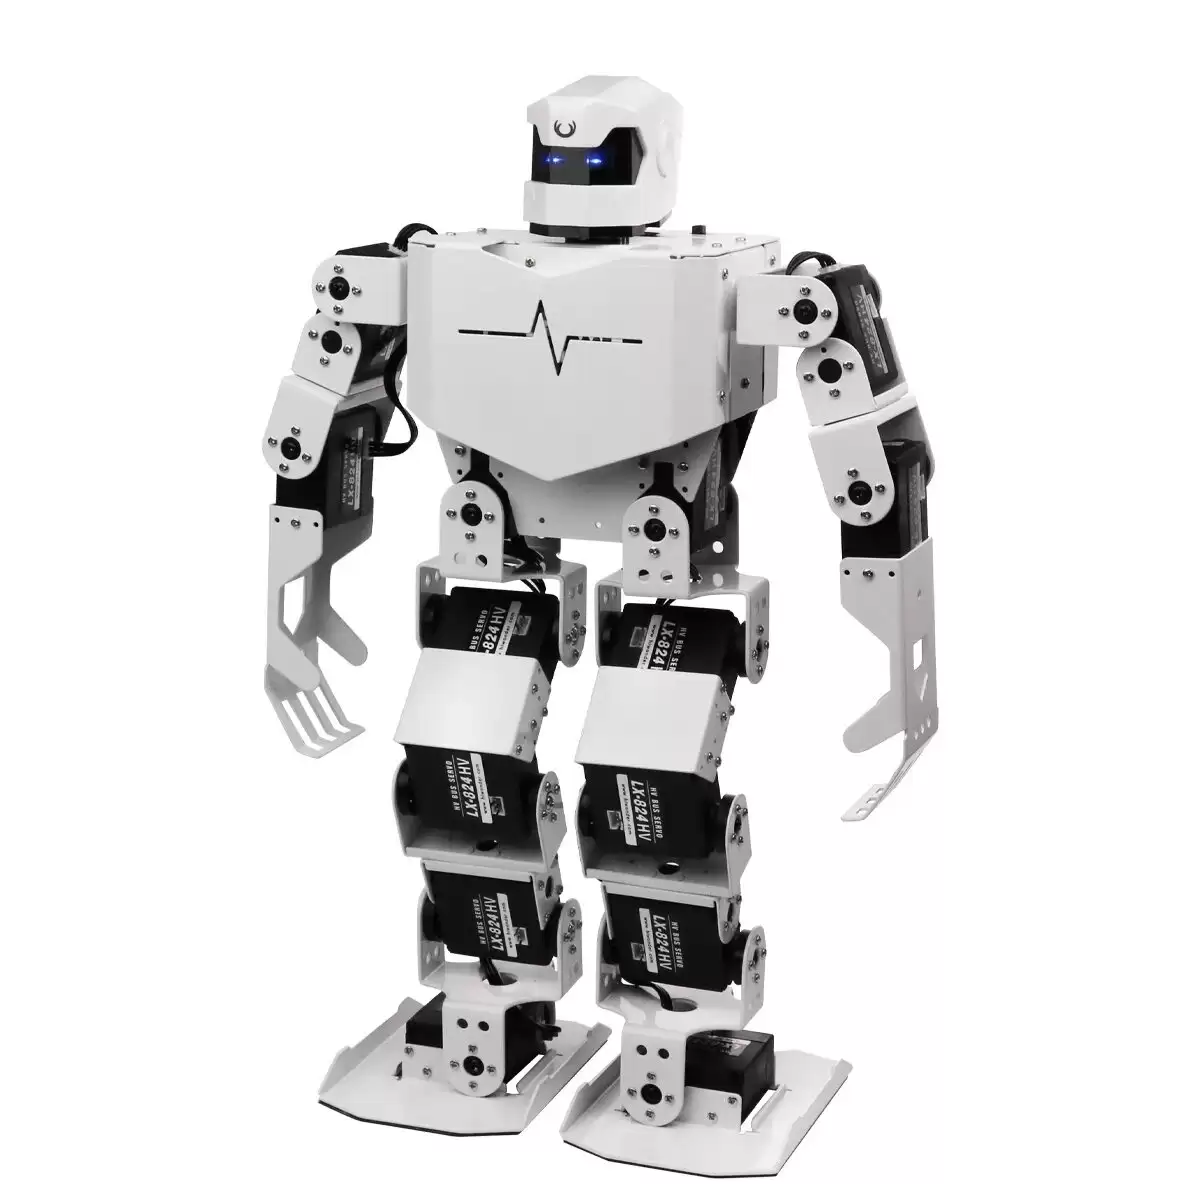 Order In Just $423.19 Hiwonder Robosoul H5s 16 Dof Intelligent Educational Programmable Bionics Humanoid Dancing Rc Robot With This Coupon At Banggood